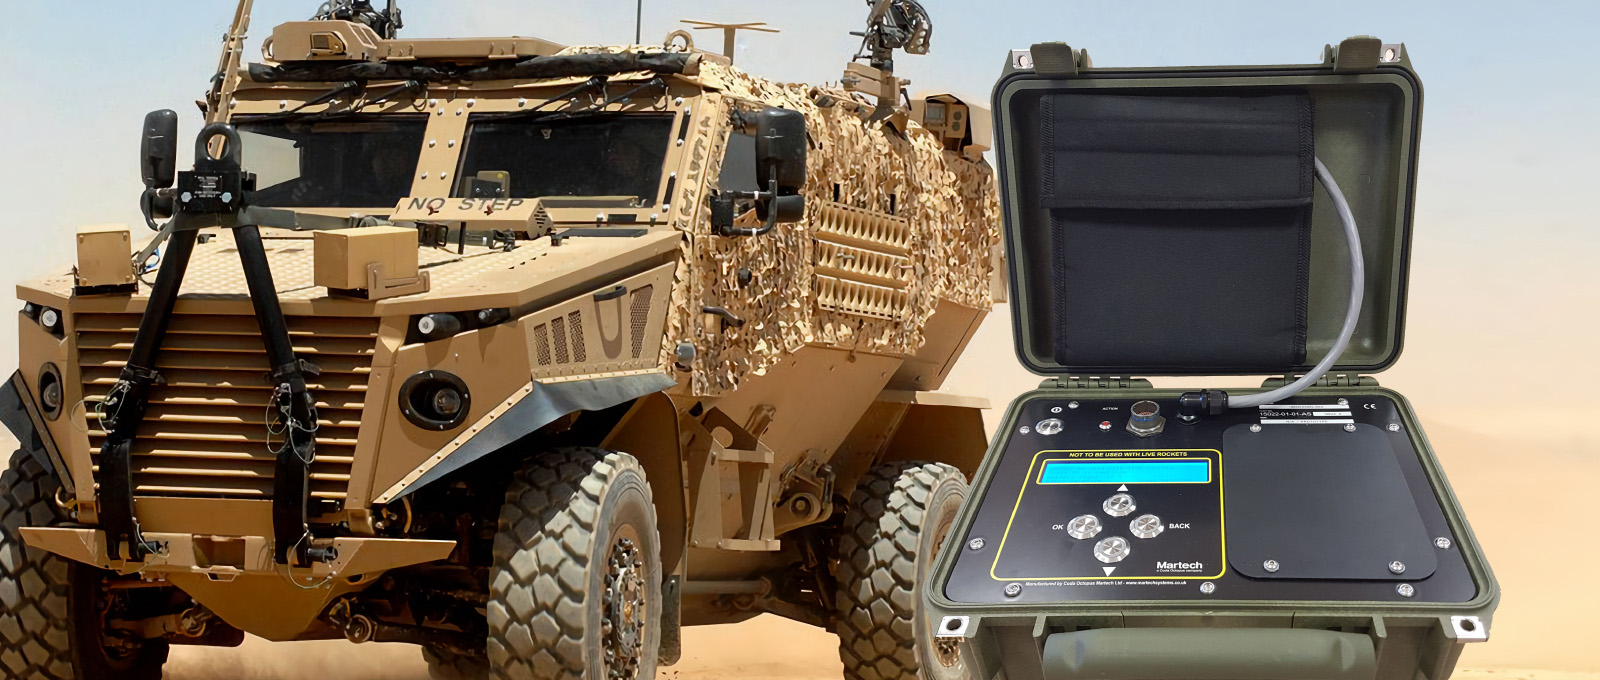 Foxhound military vehicle with special test equipment in a rugged Pelicase for the British Army